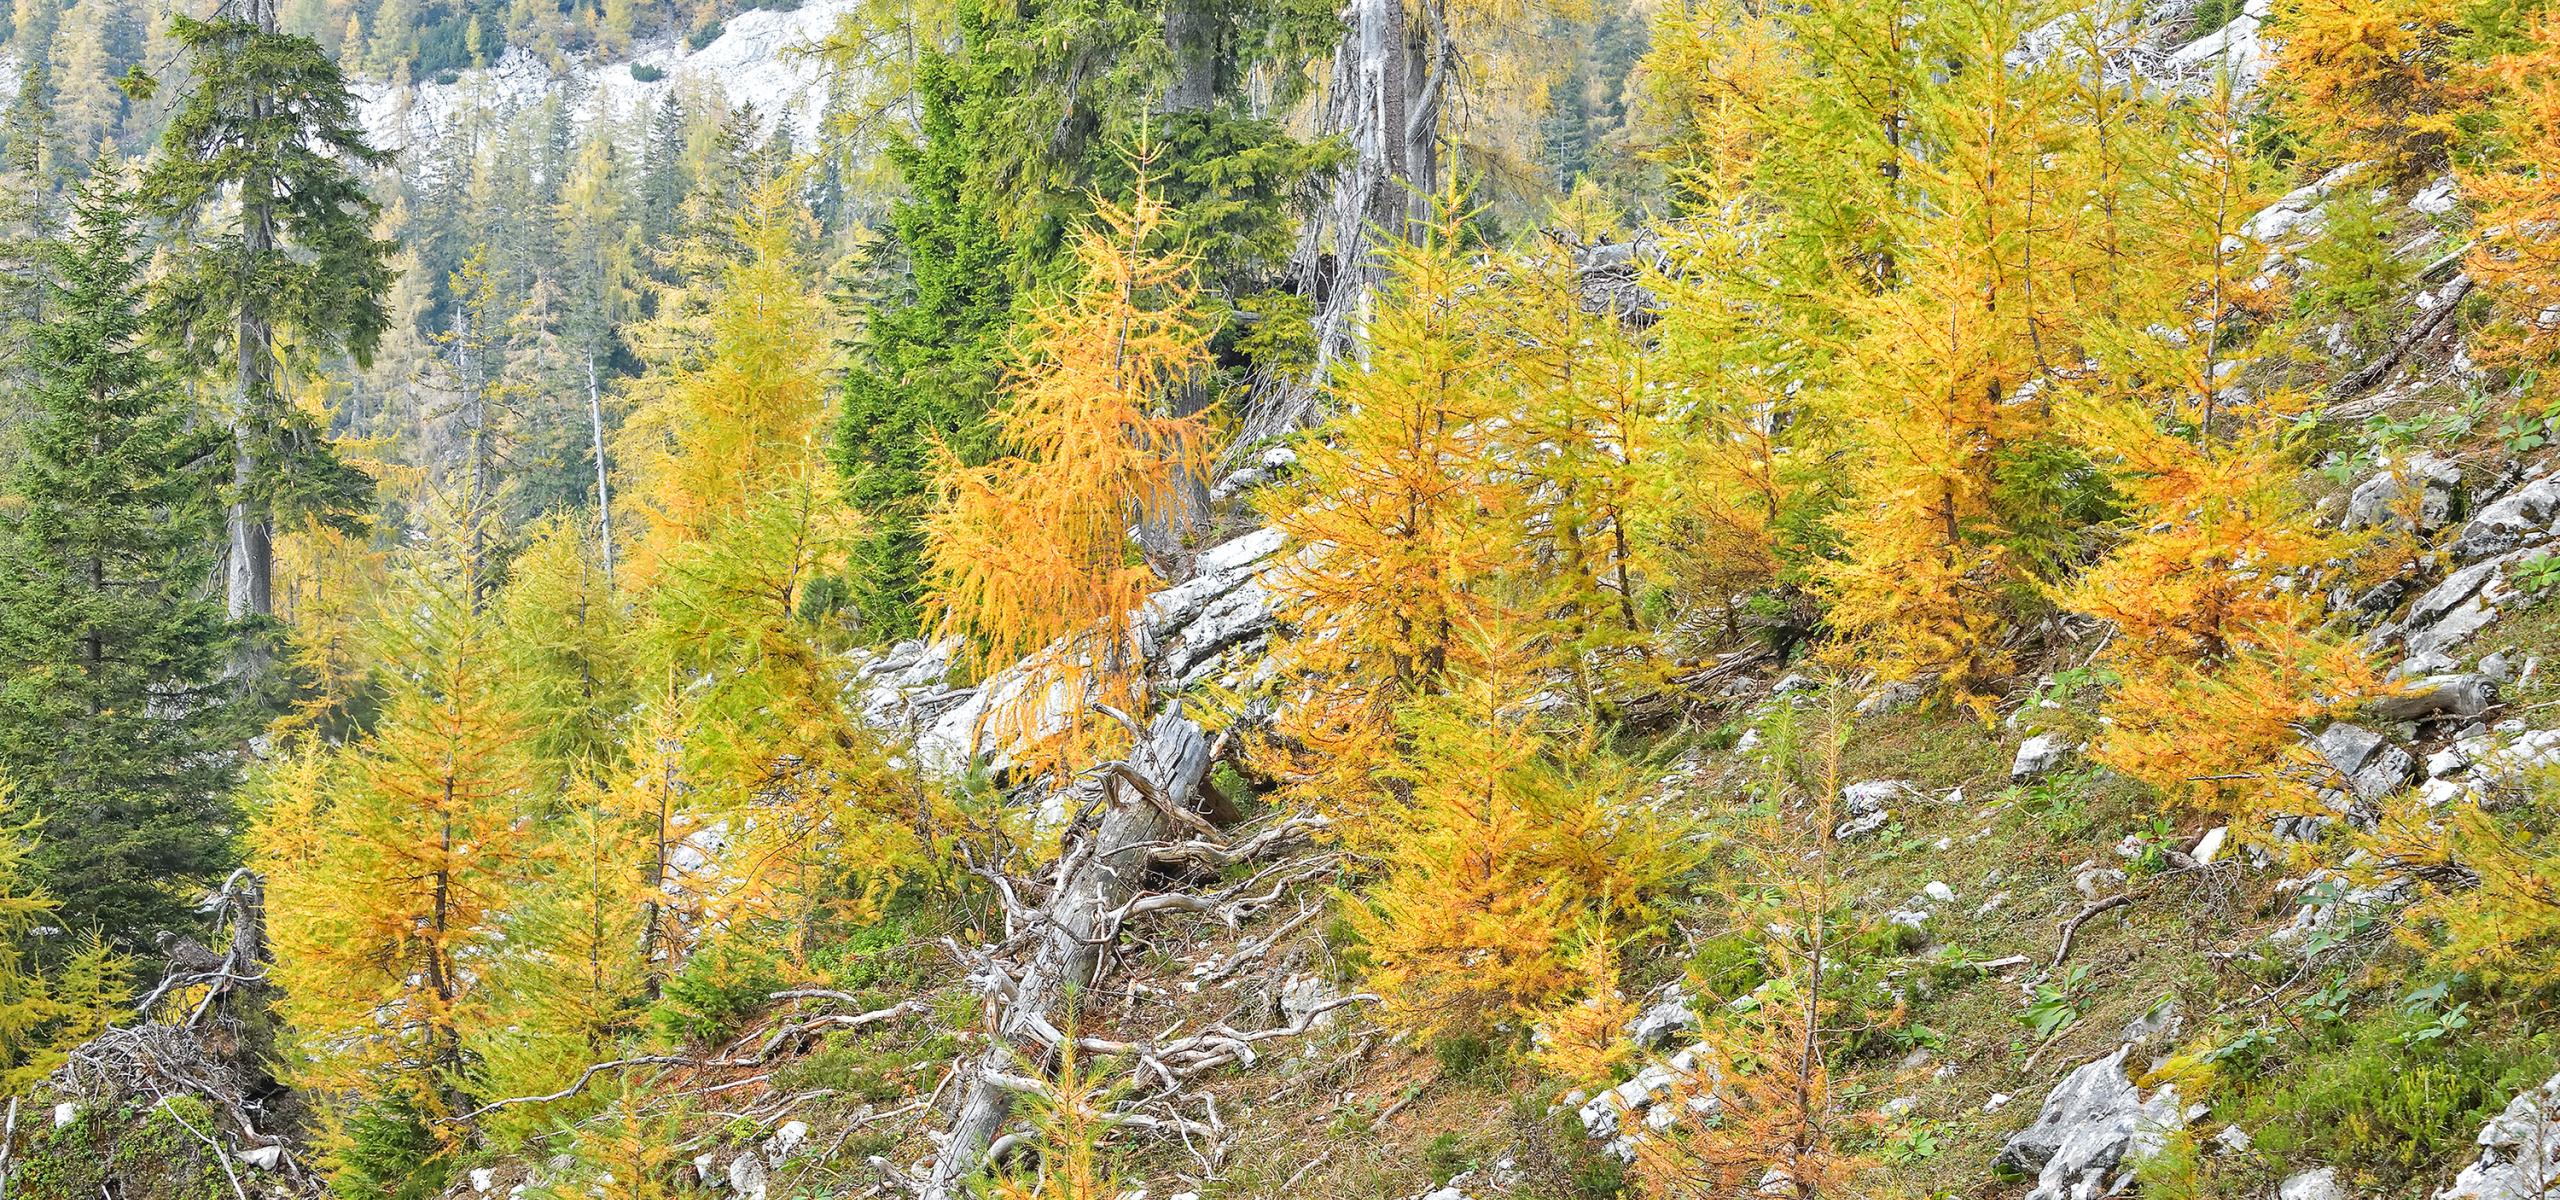 Larches with bright yellow autumn colors on a steep mountainside